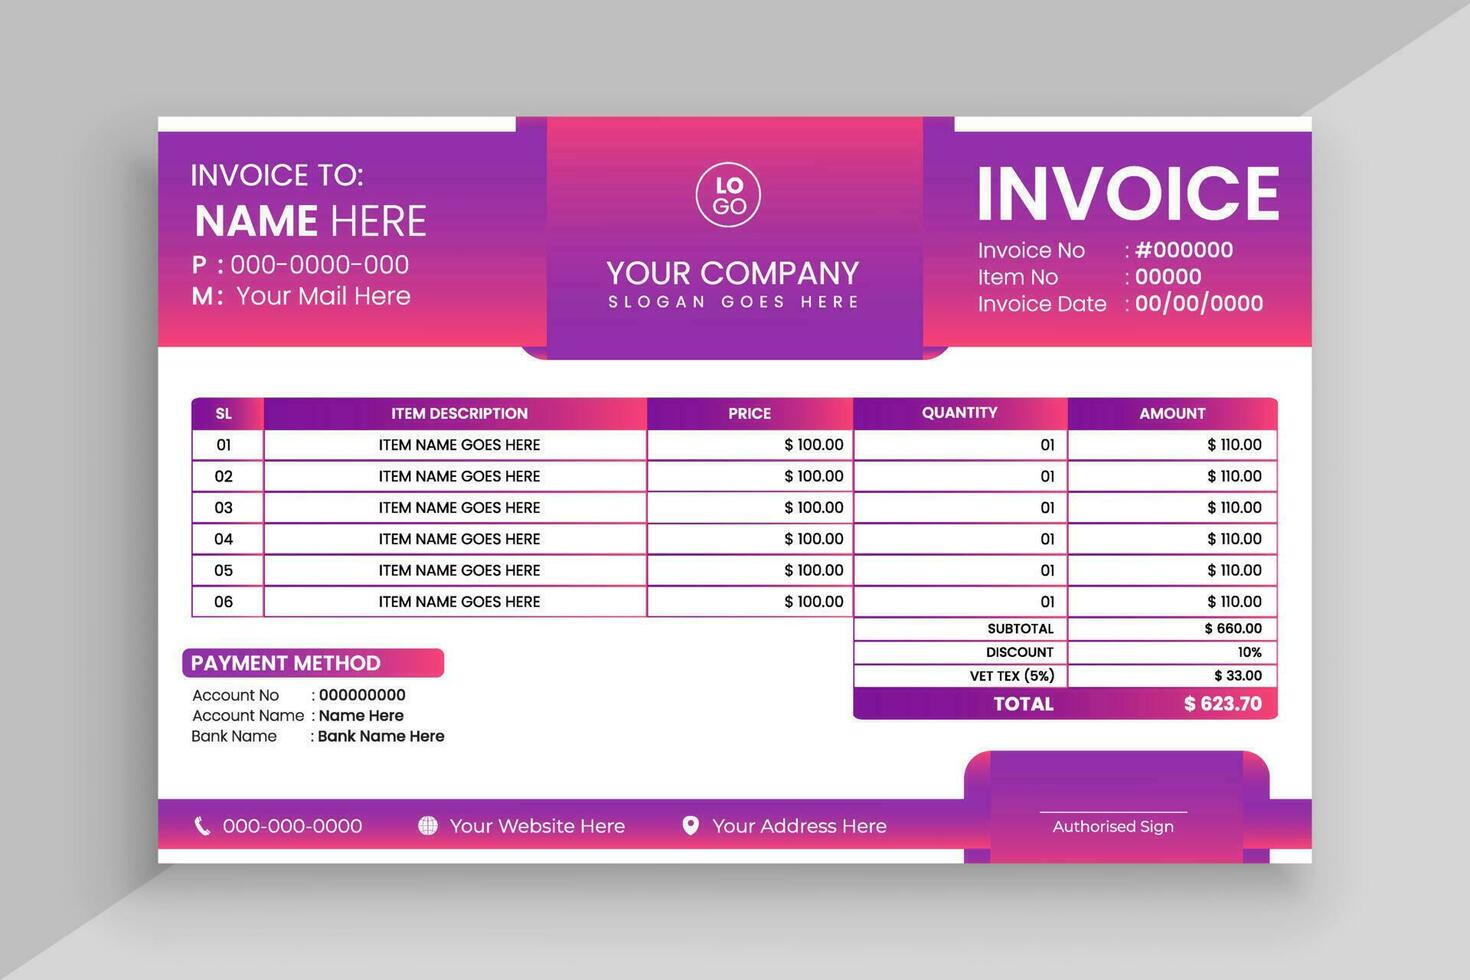 Invoice template with money receipt table vector